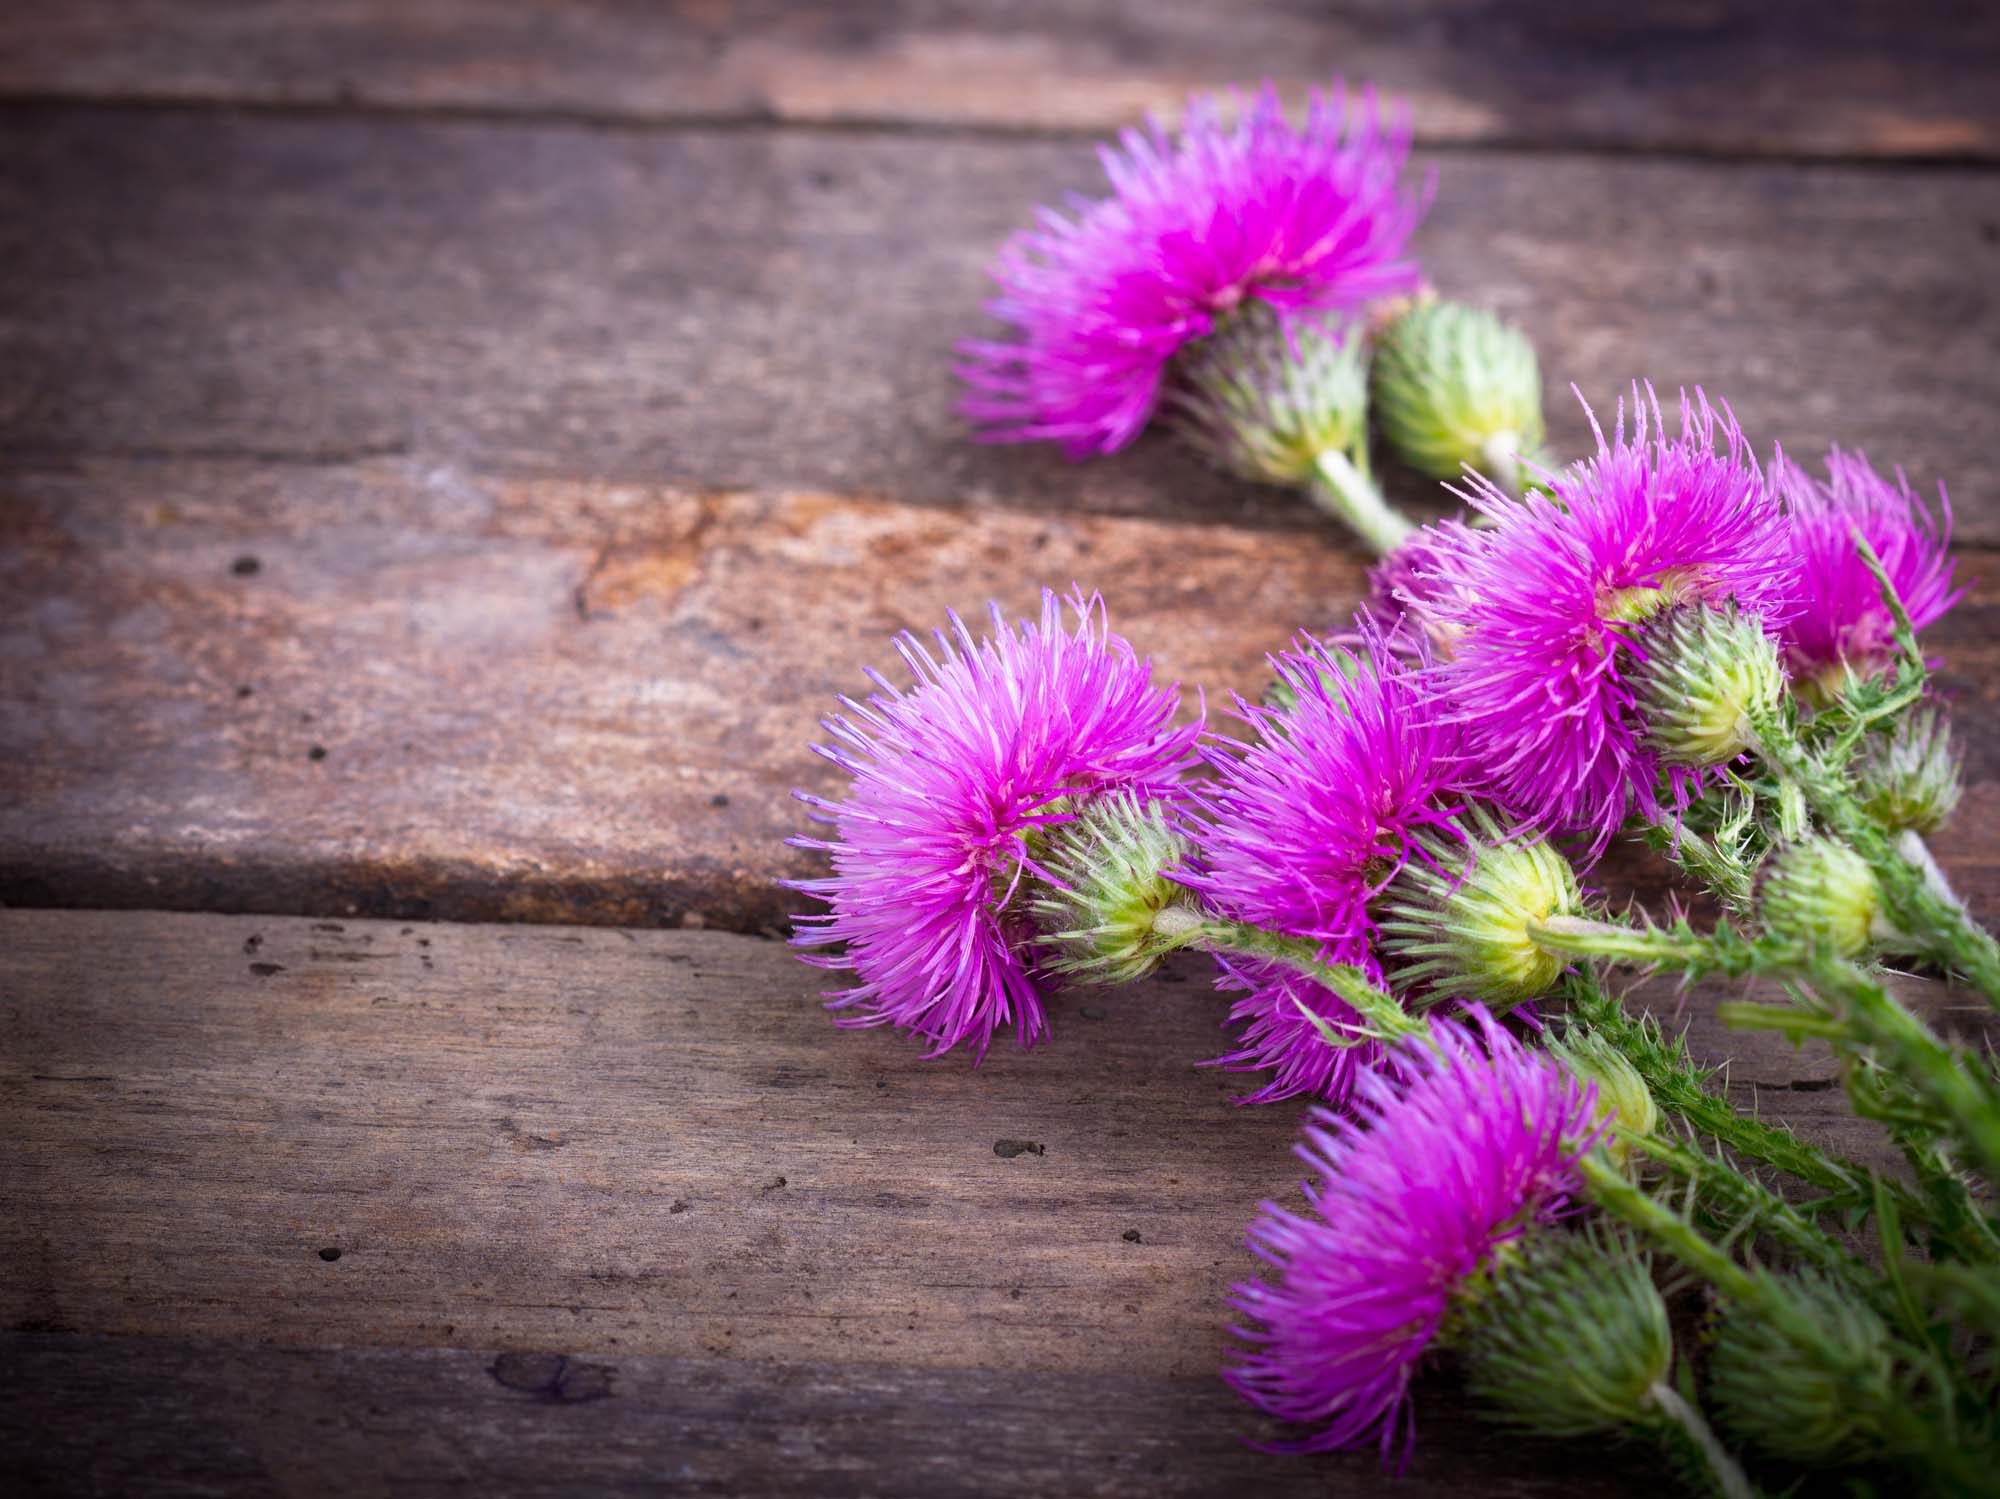 Burdock on the wooden background